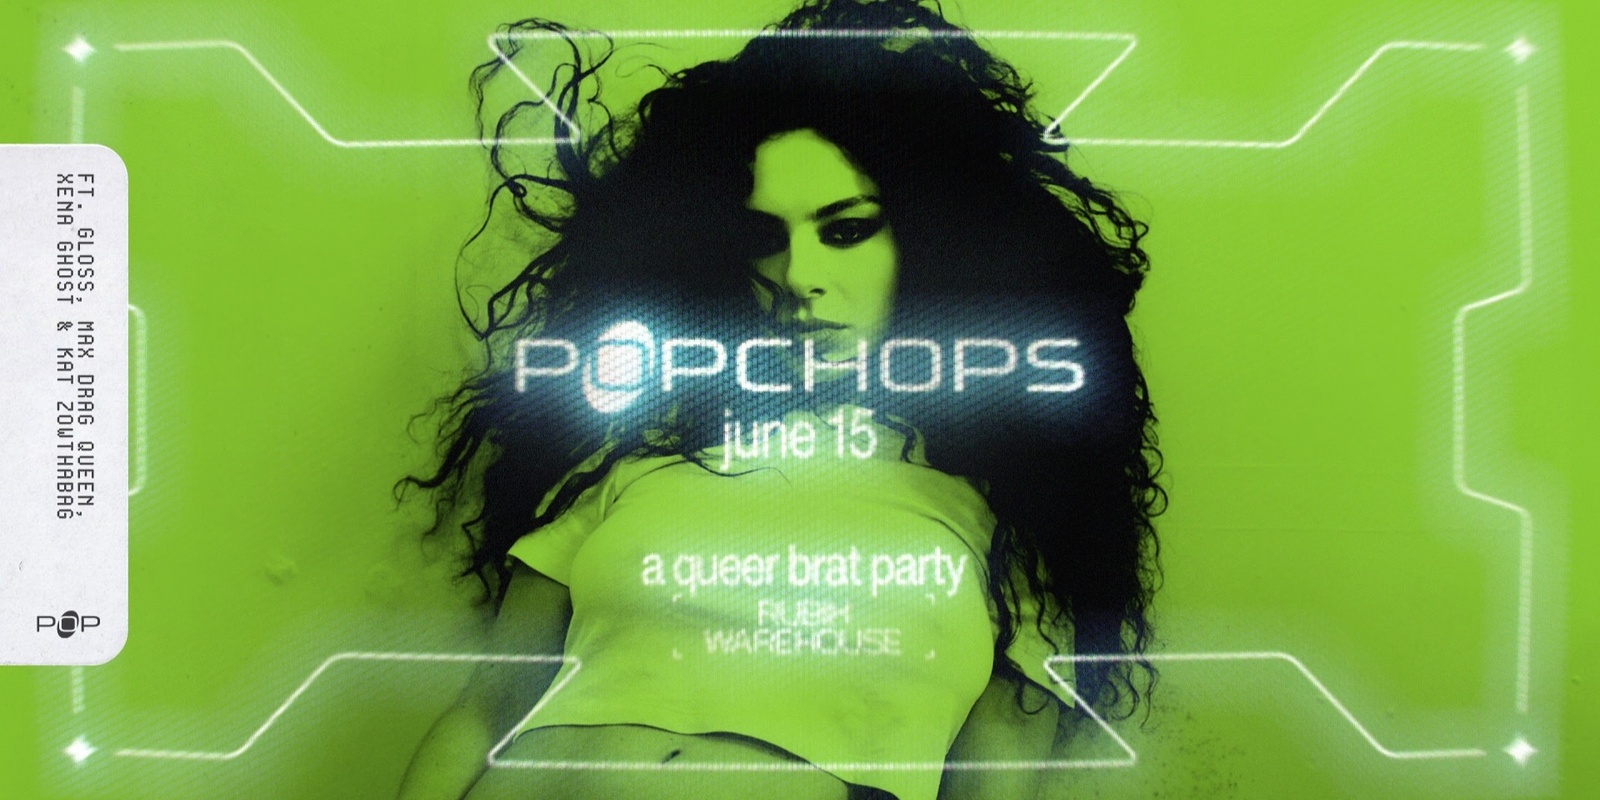 Banner image for Popchops: A Queer BRAT Party